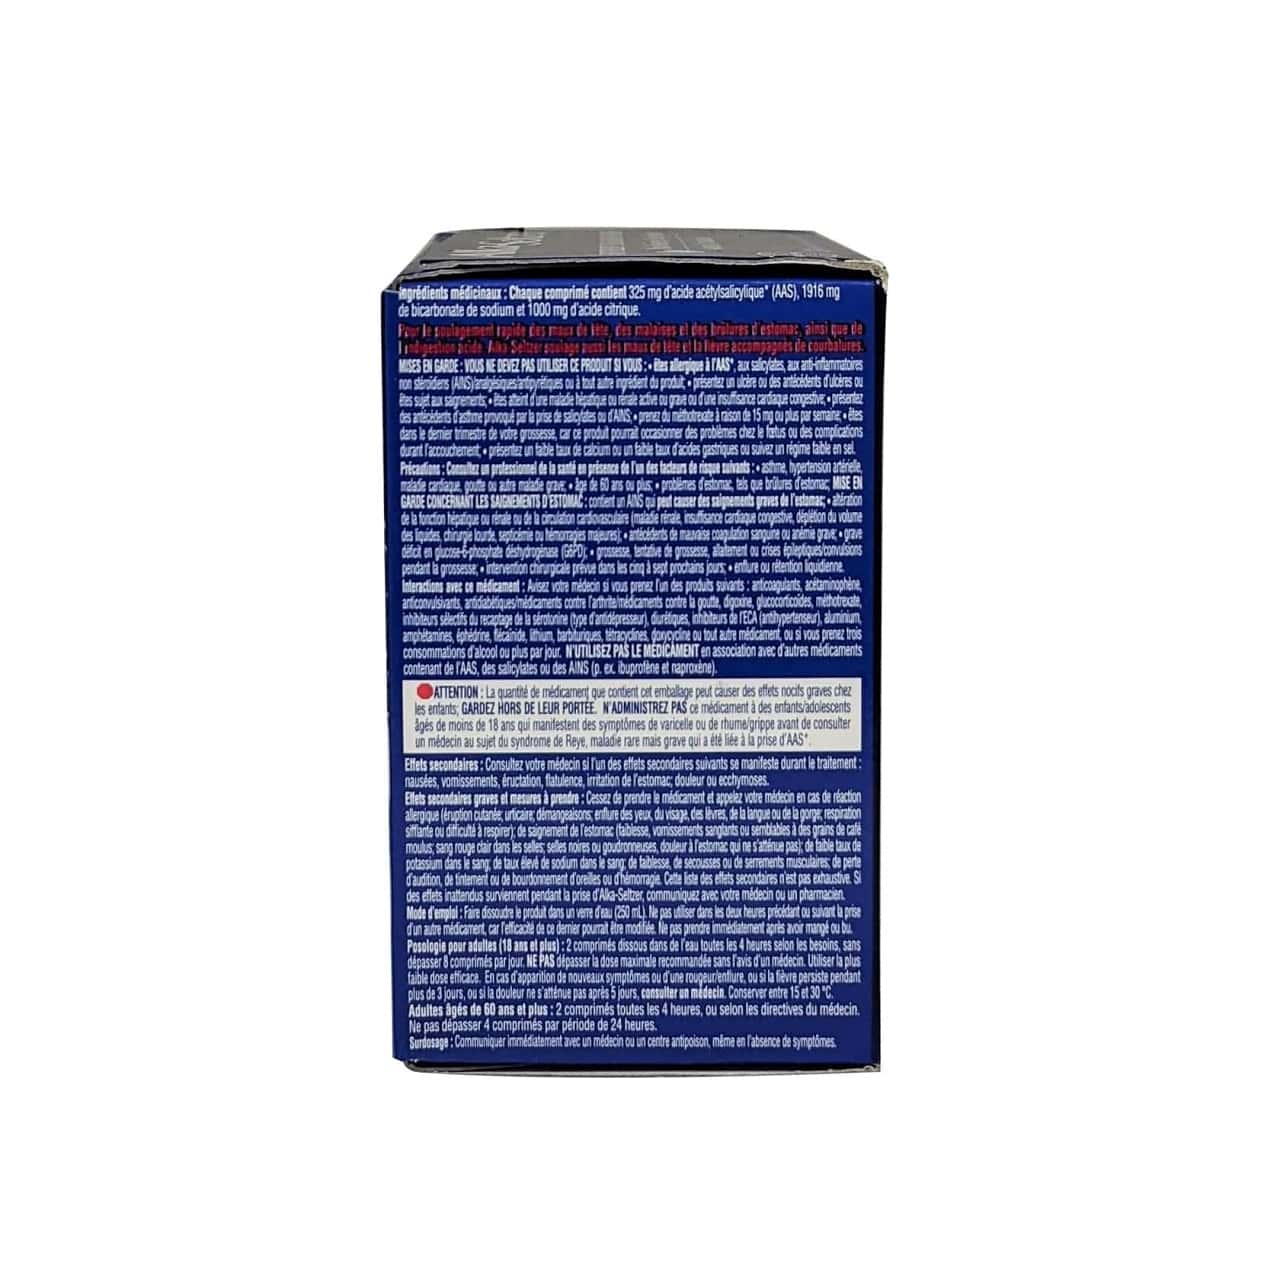 Product details, ingredients, directions, and warnings for Alka-Seltzer Acetylsalicylic Acid Effervescent Tablets in French